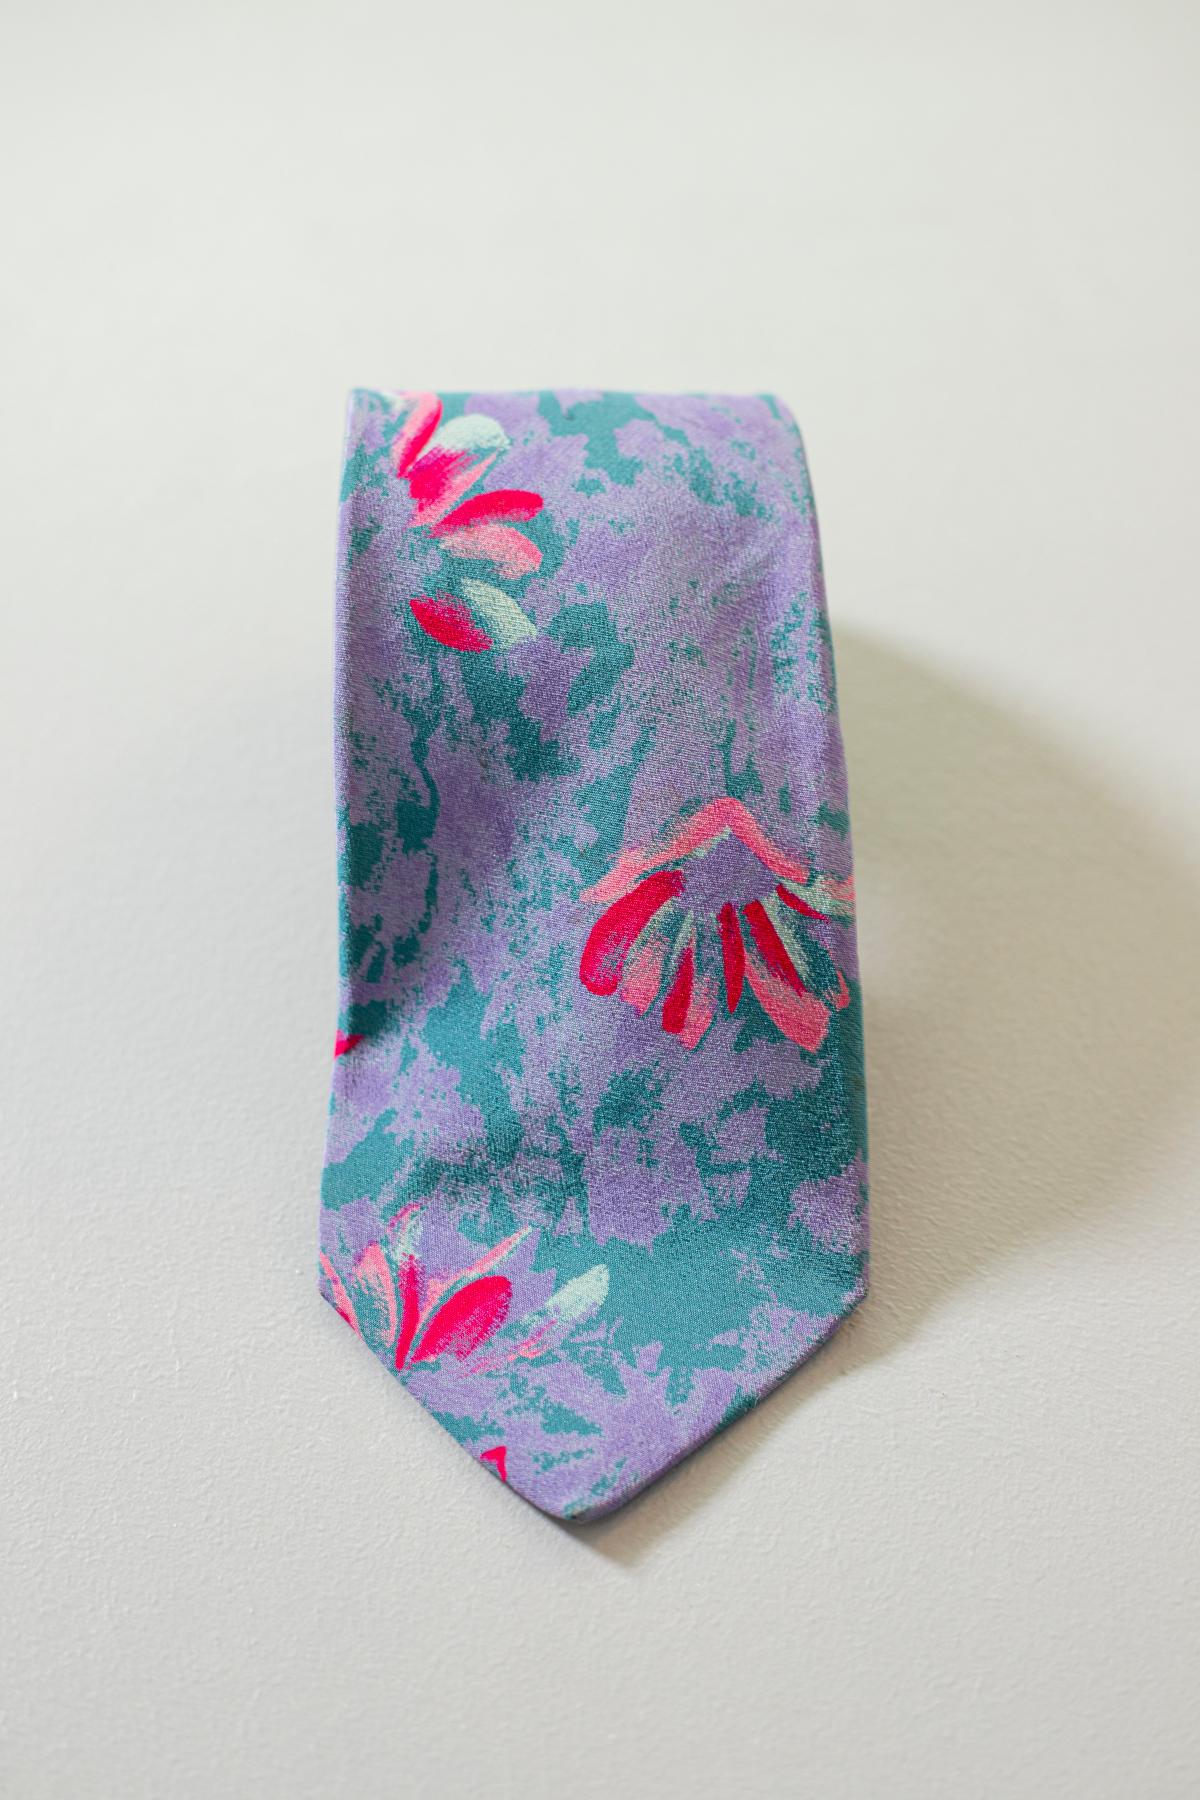 A true evergreen, this tie is designed by the famous fashion designer Valentino, reflects the great Italian taste in fashion. This vintage all silk tie is colorful, yet classic. decorated with shades of colors, mainly on lilac, with slightly